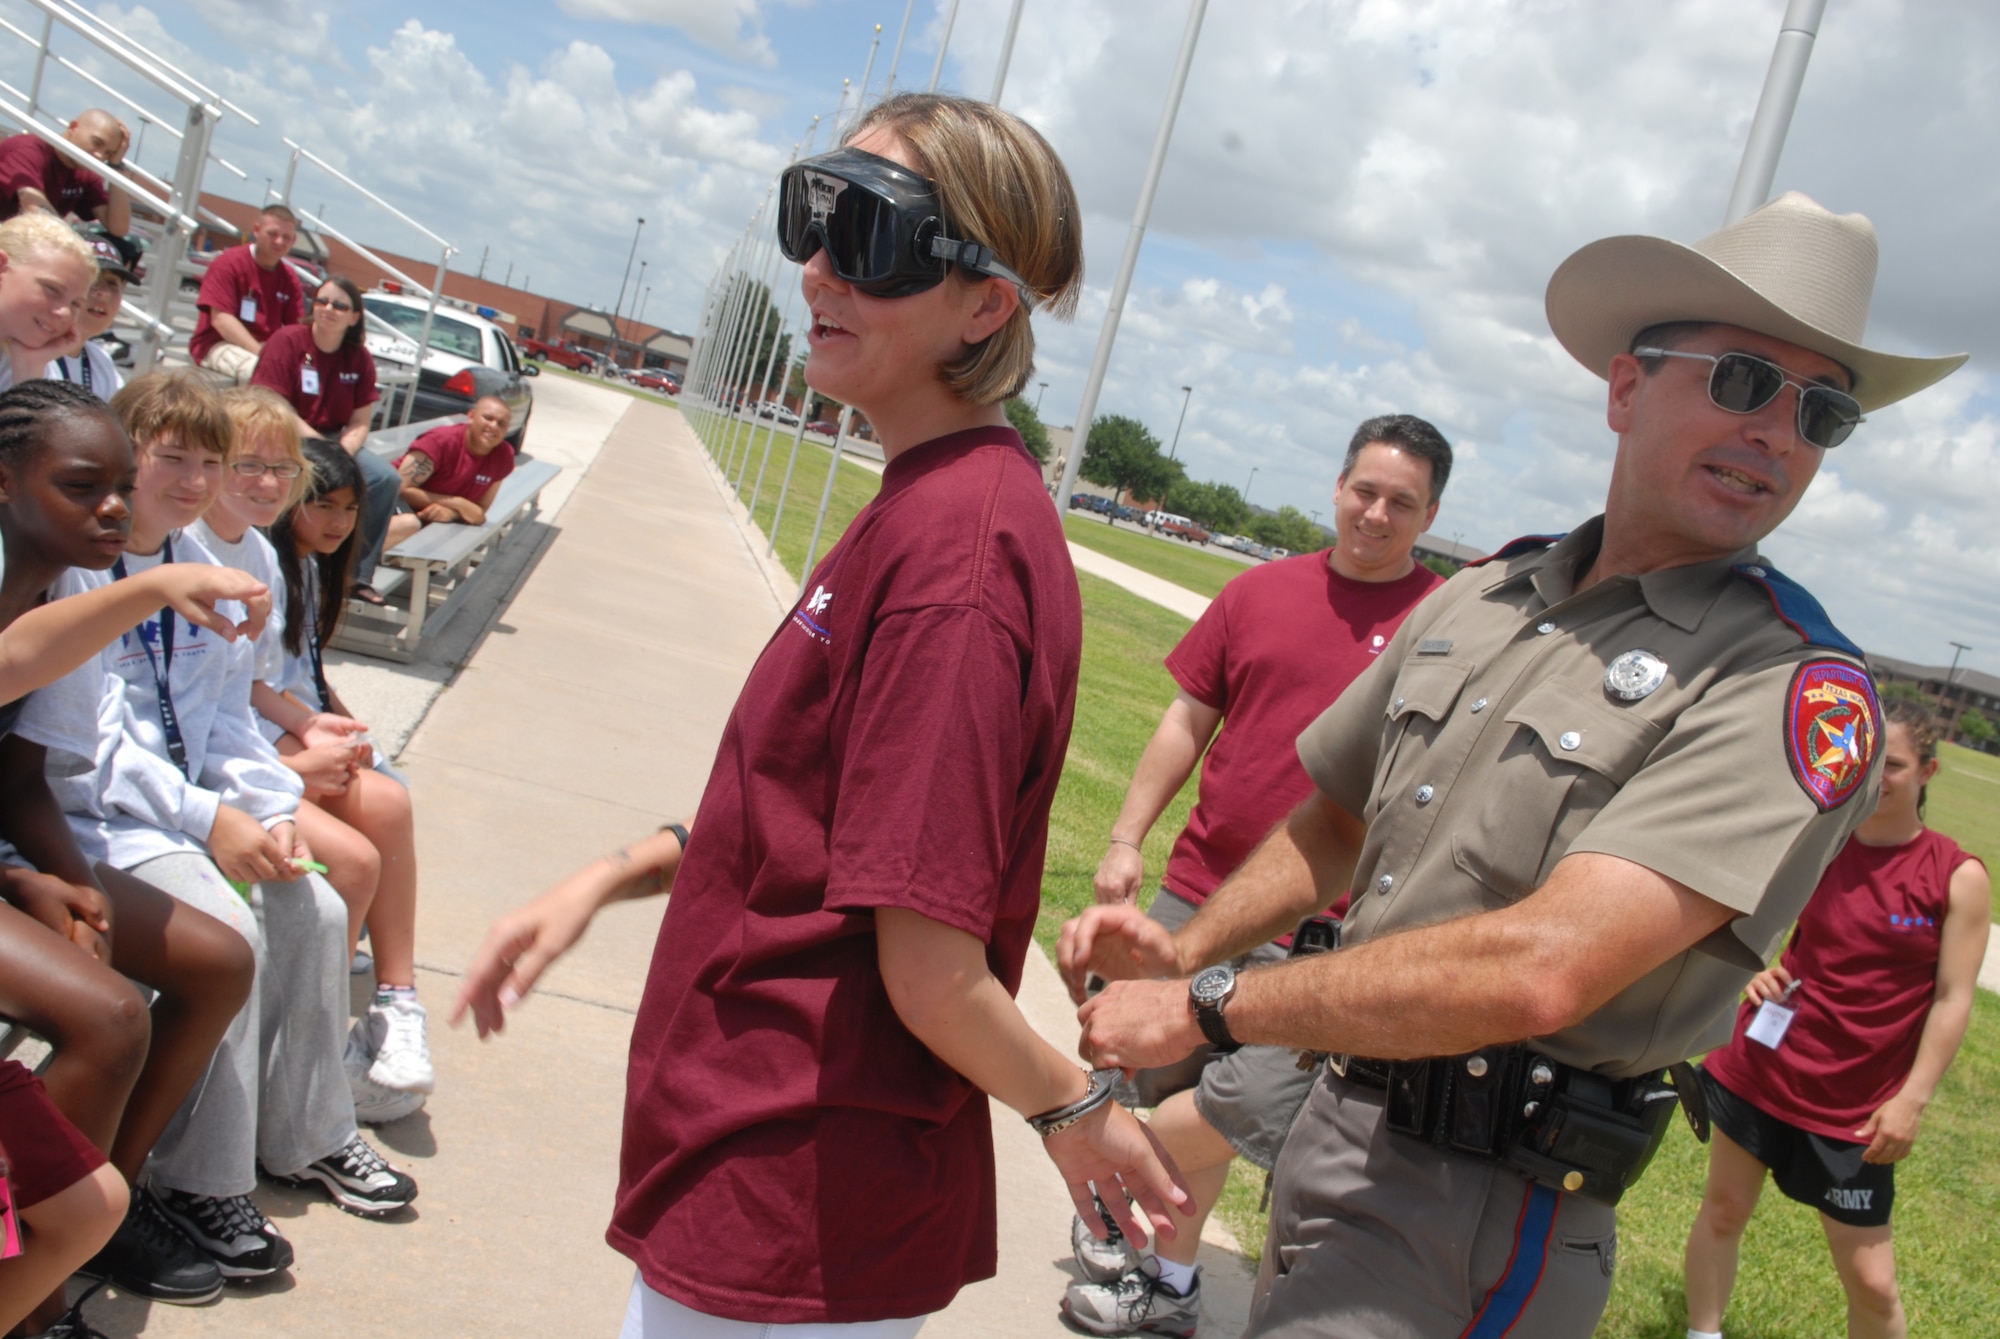 Texas Department of Public Safety Trooper Shawn Baxter puts Staff Sgt. Stacie Myers in handcuffs during a demonstration on the dangers of drinking and driving. In addition to being a volunteer with the Drug Education for Youth program, Sergeant Myers is the president of Airmen Against Drunk Driving. (U.S. Air Force Photo by Airman 1st Class Kamaile Chan)